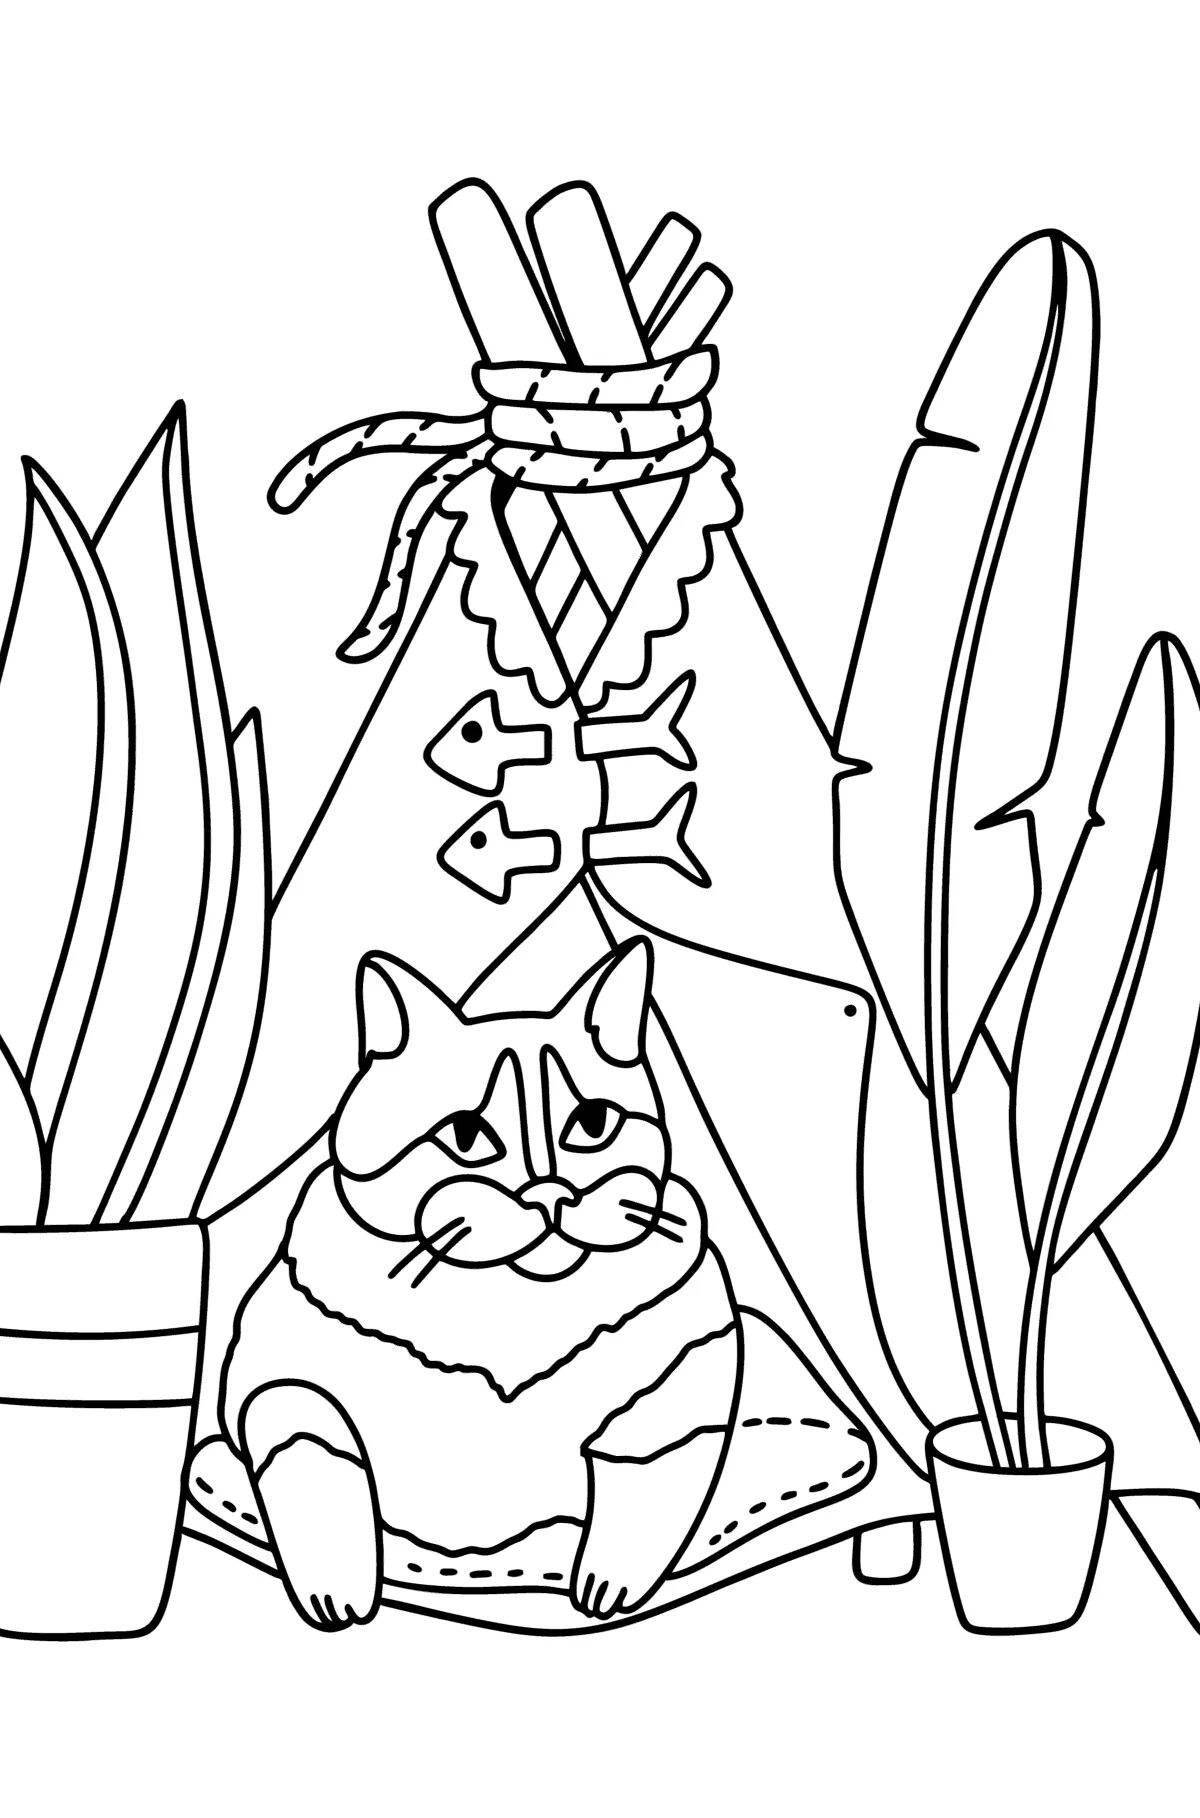 Cute chinese cat coloring book